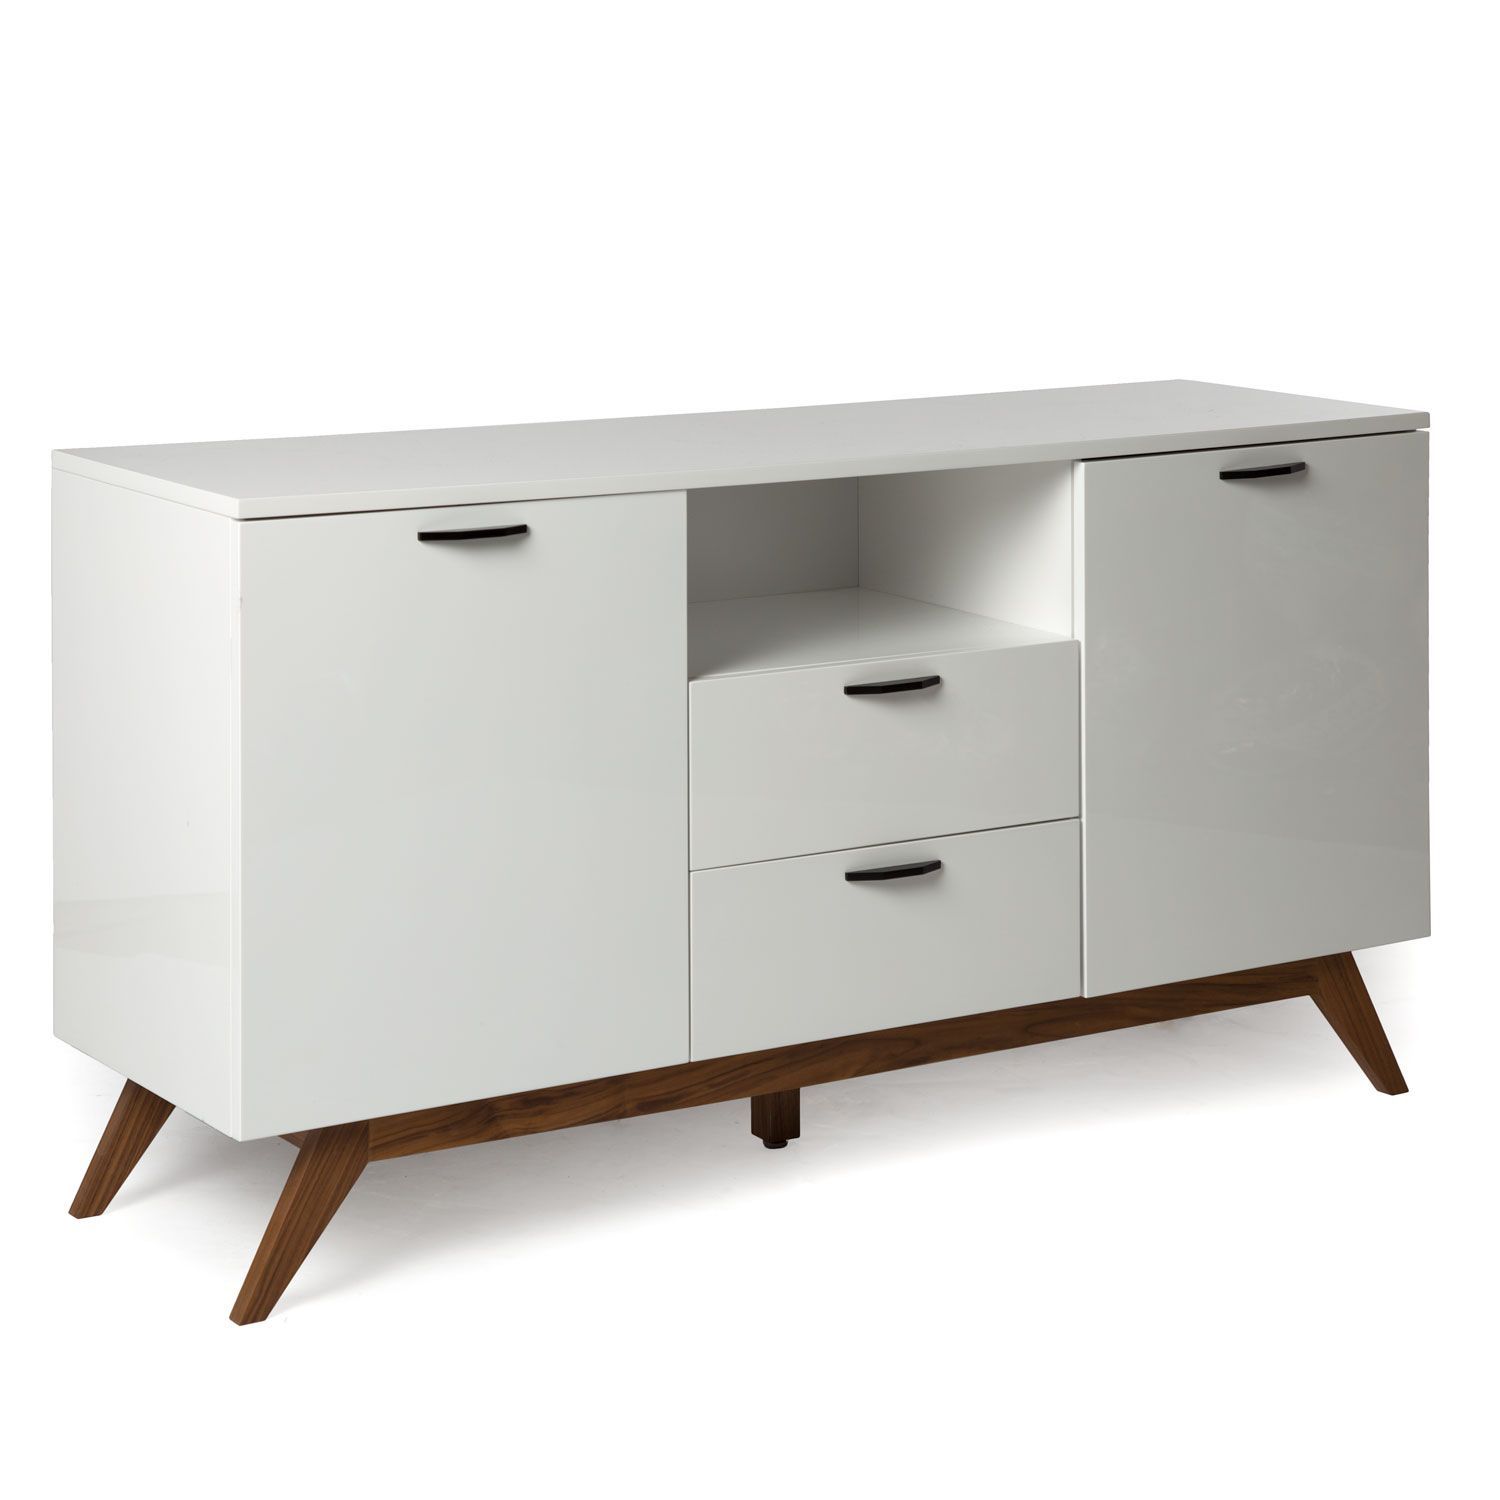 Dalia | Sideboard – White | Sevina's Dining Room Final Within Shoreland Sideboards (View 29 of 30)